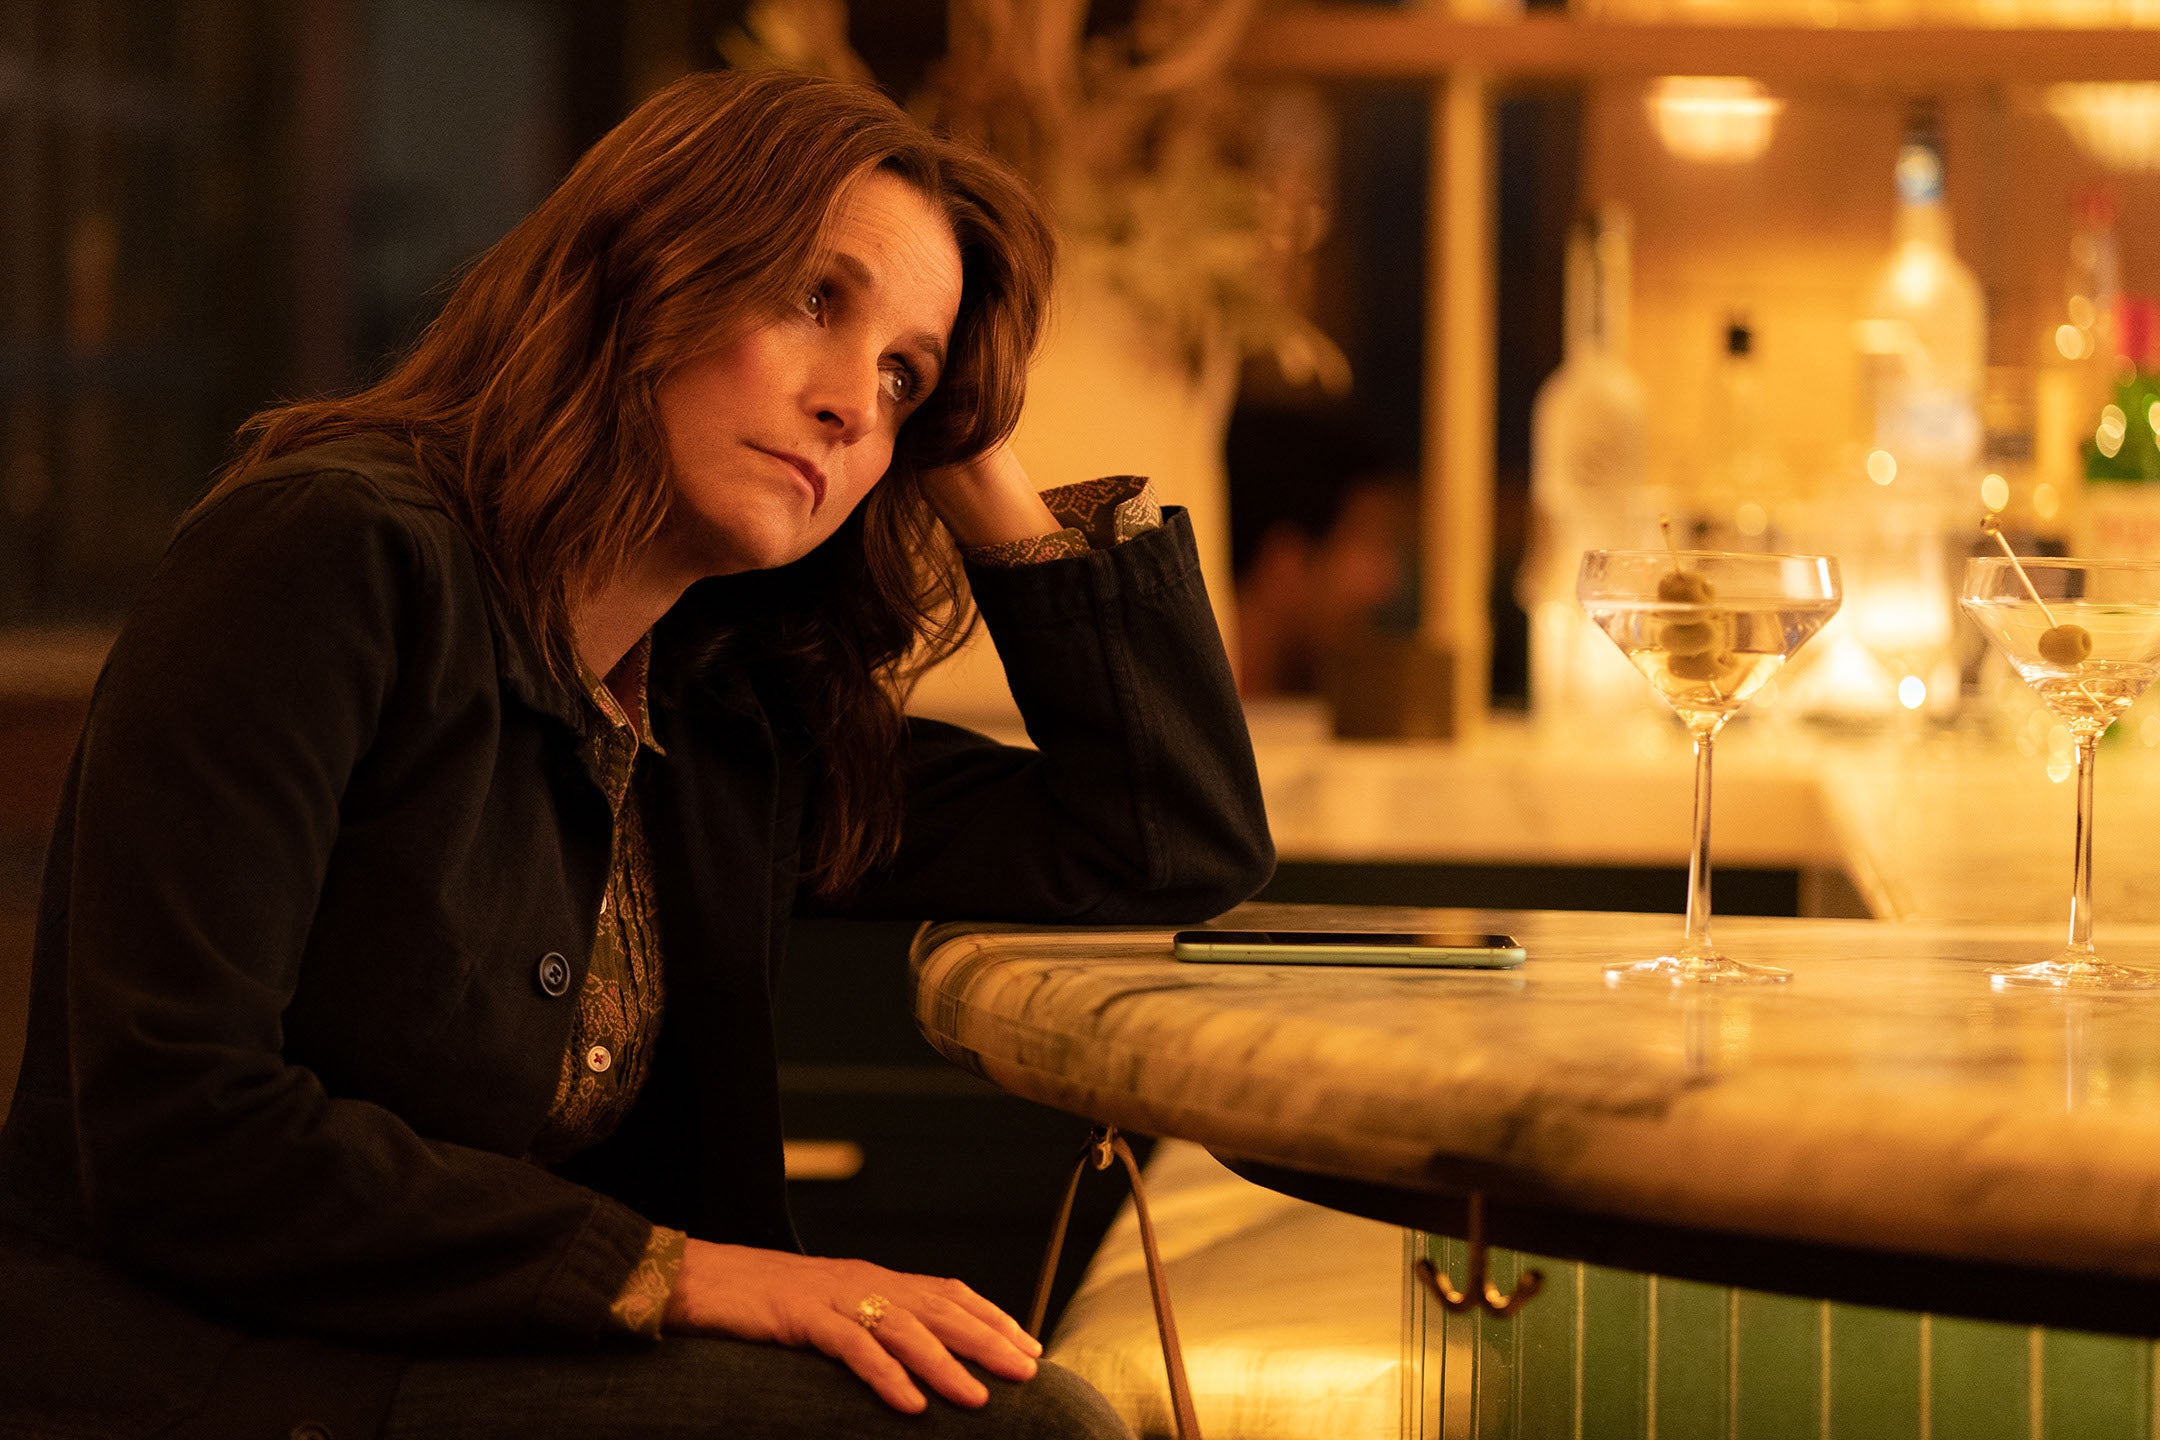 She sits at a fancy marble bar, a martini in front of her, looking somewhat despondent with her head in her left hand.